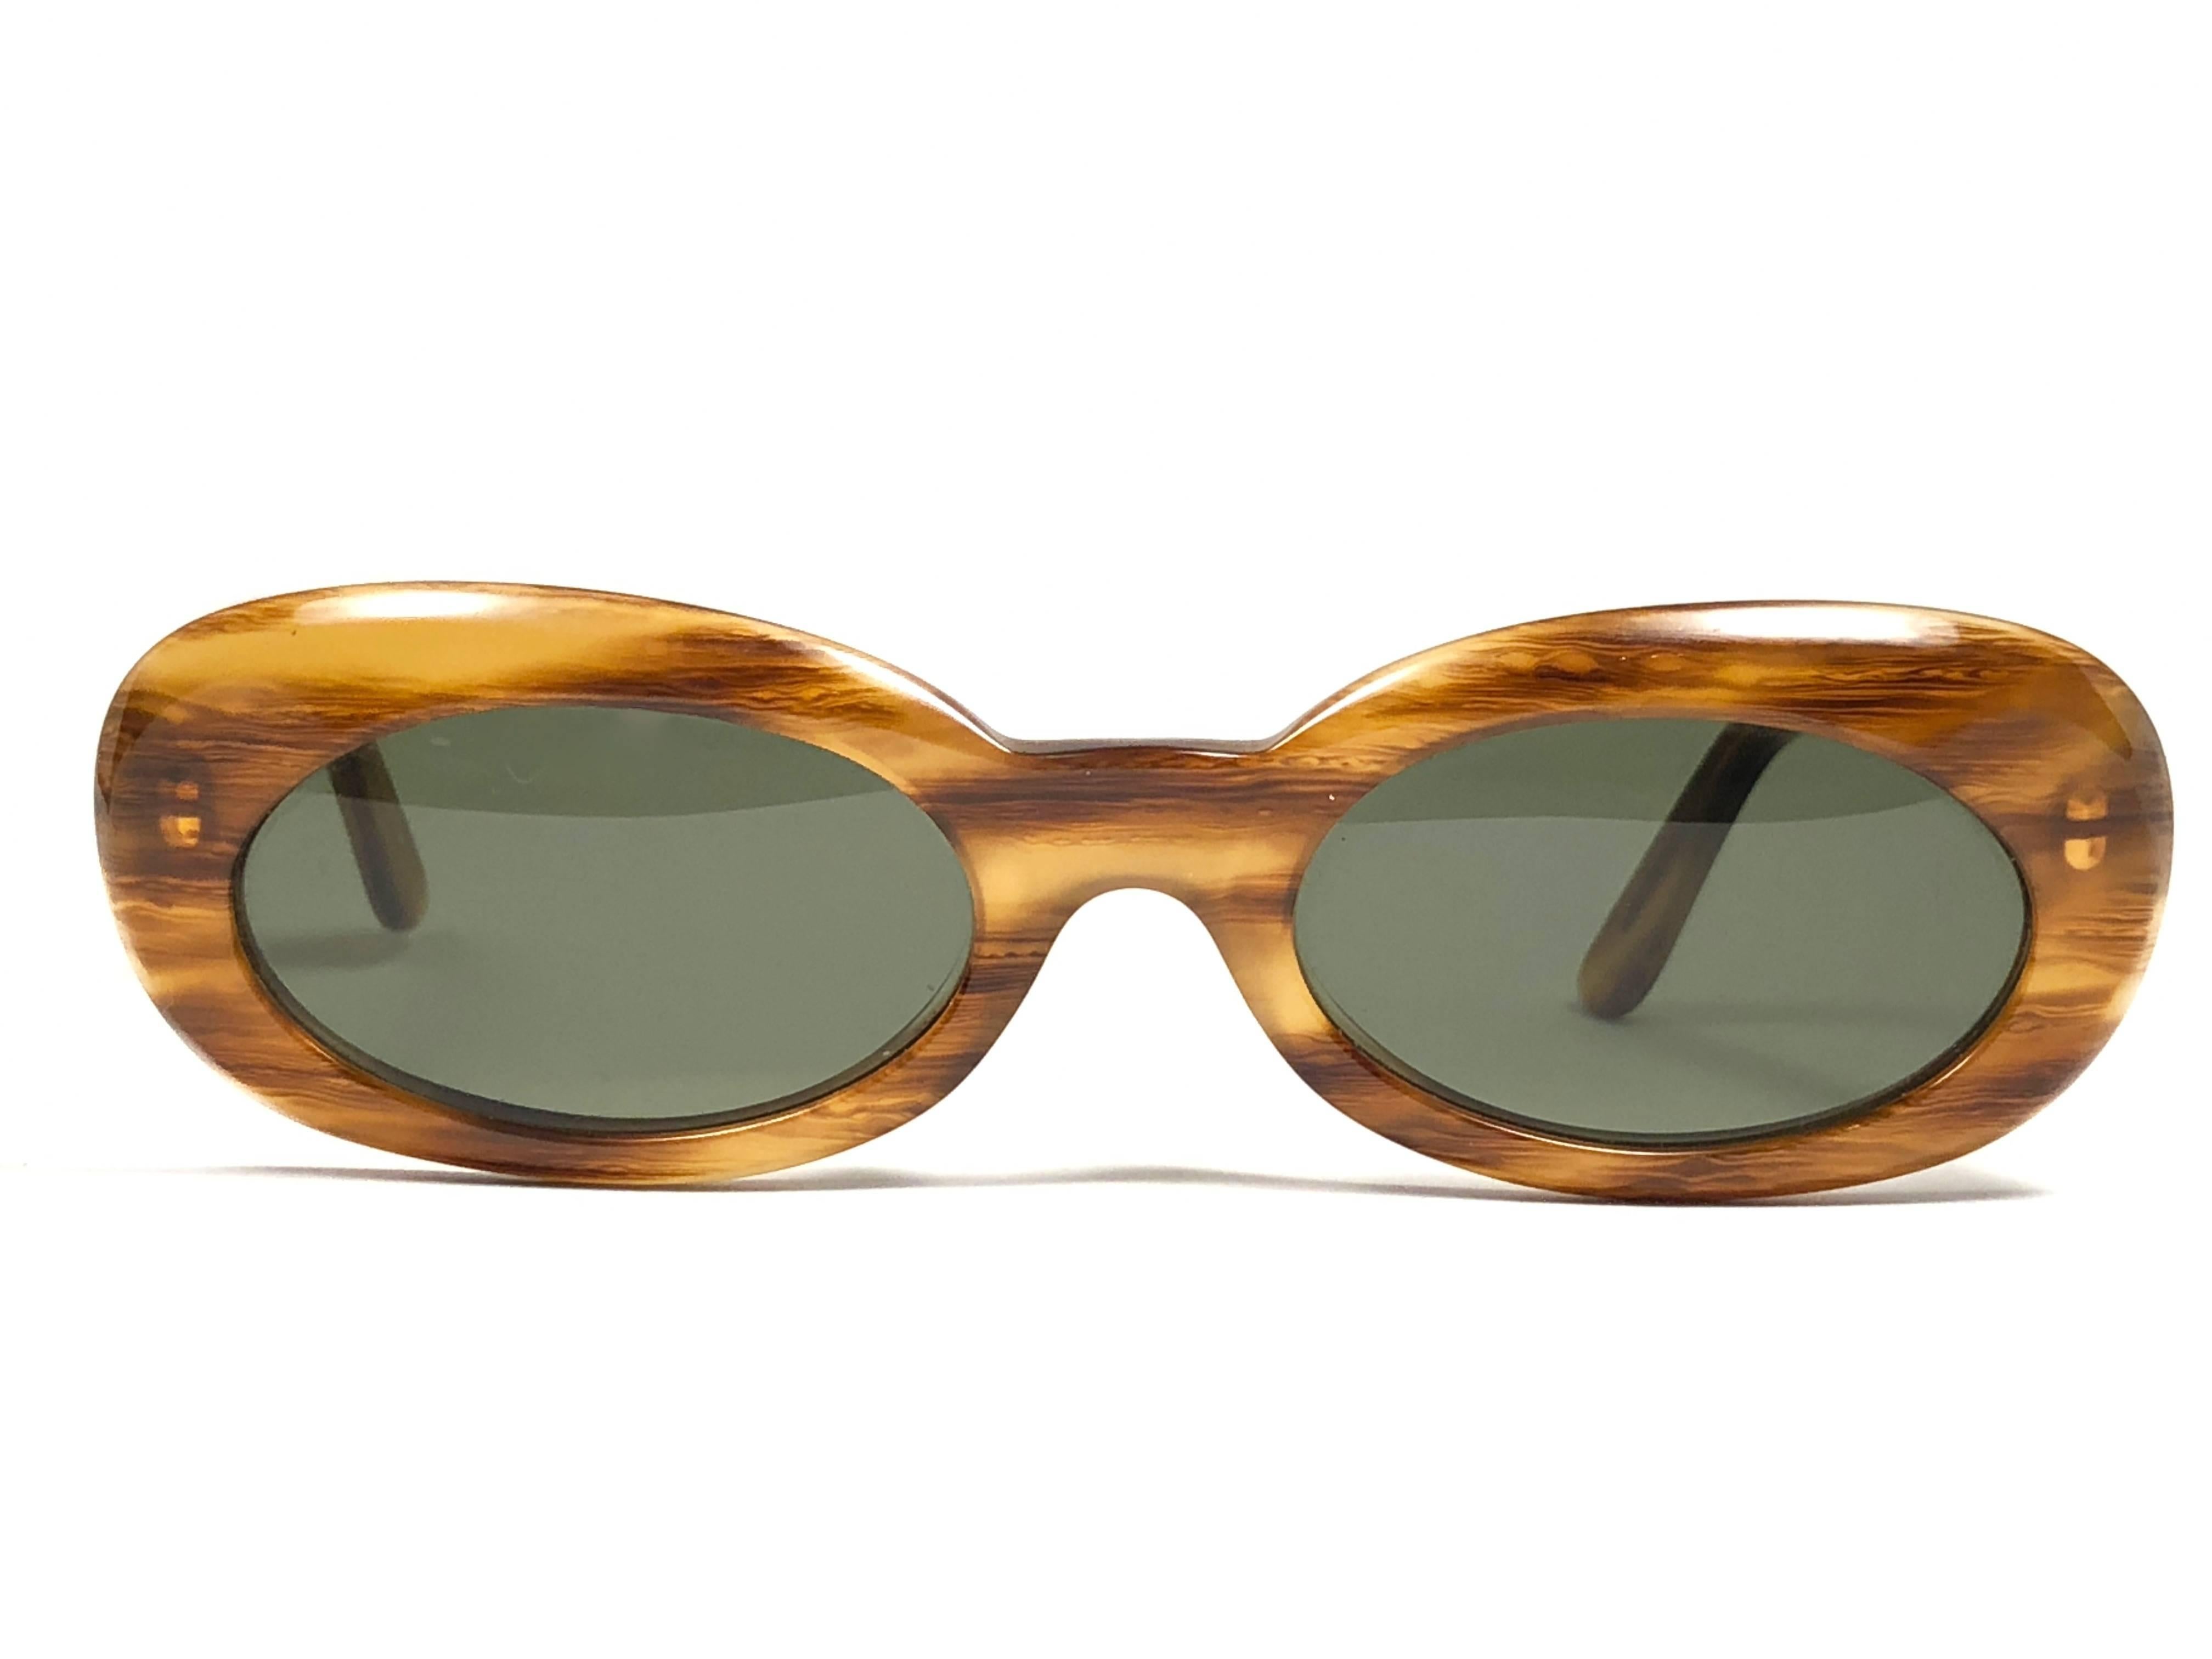 Mint Vintage Moschino small medium tortoise with gold detail frame with spotless grey lenses.

Made in Italy.
 
Produced and design in 1990's.

This item is in mint vintage condition with minor wear on the frame.